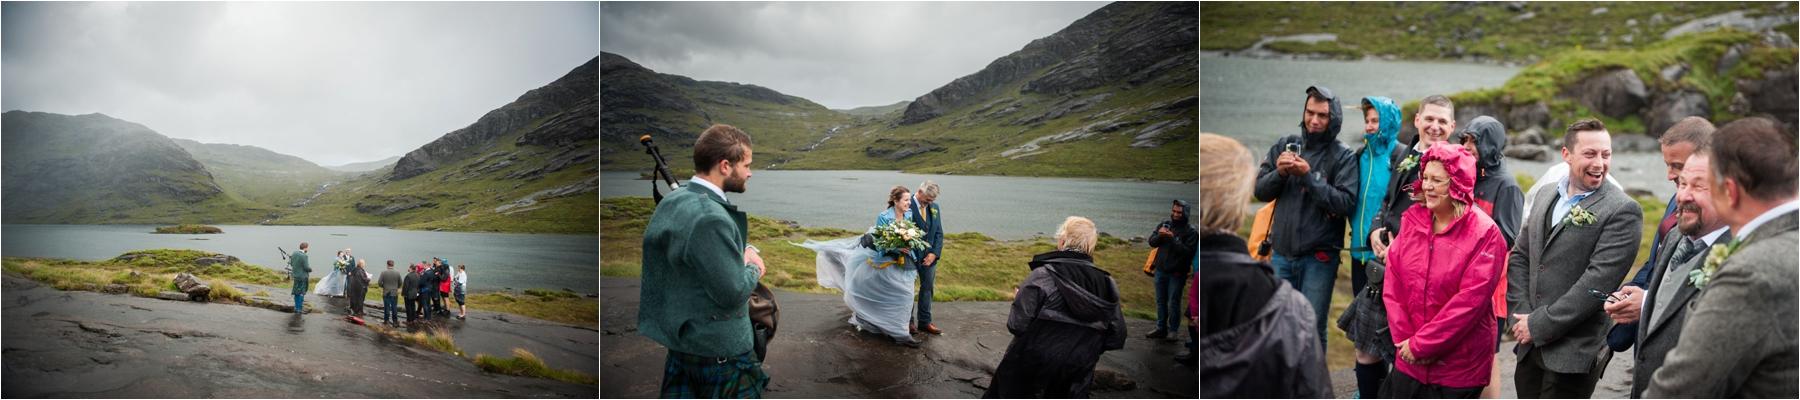 A wedding ceremony on the banks of Loch Coruisk during dramatic wind and rain. 